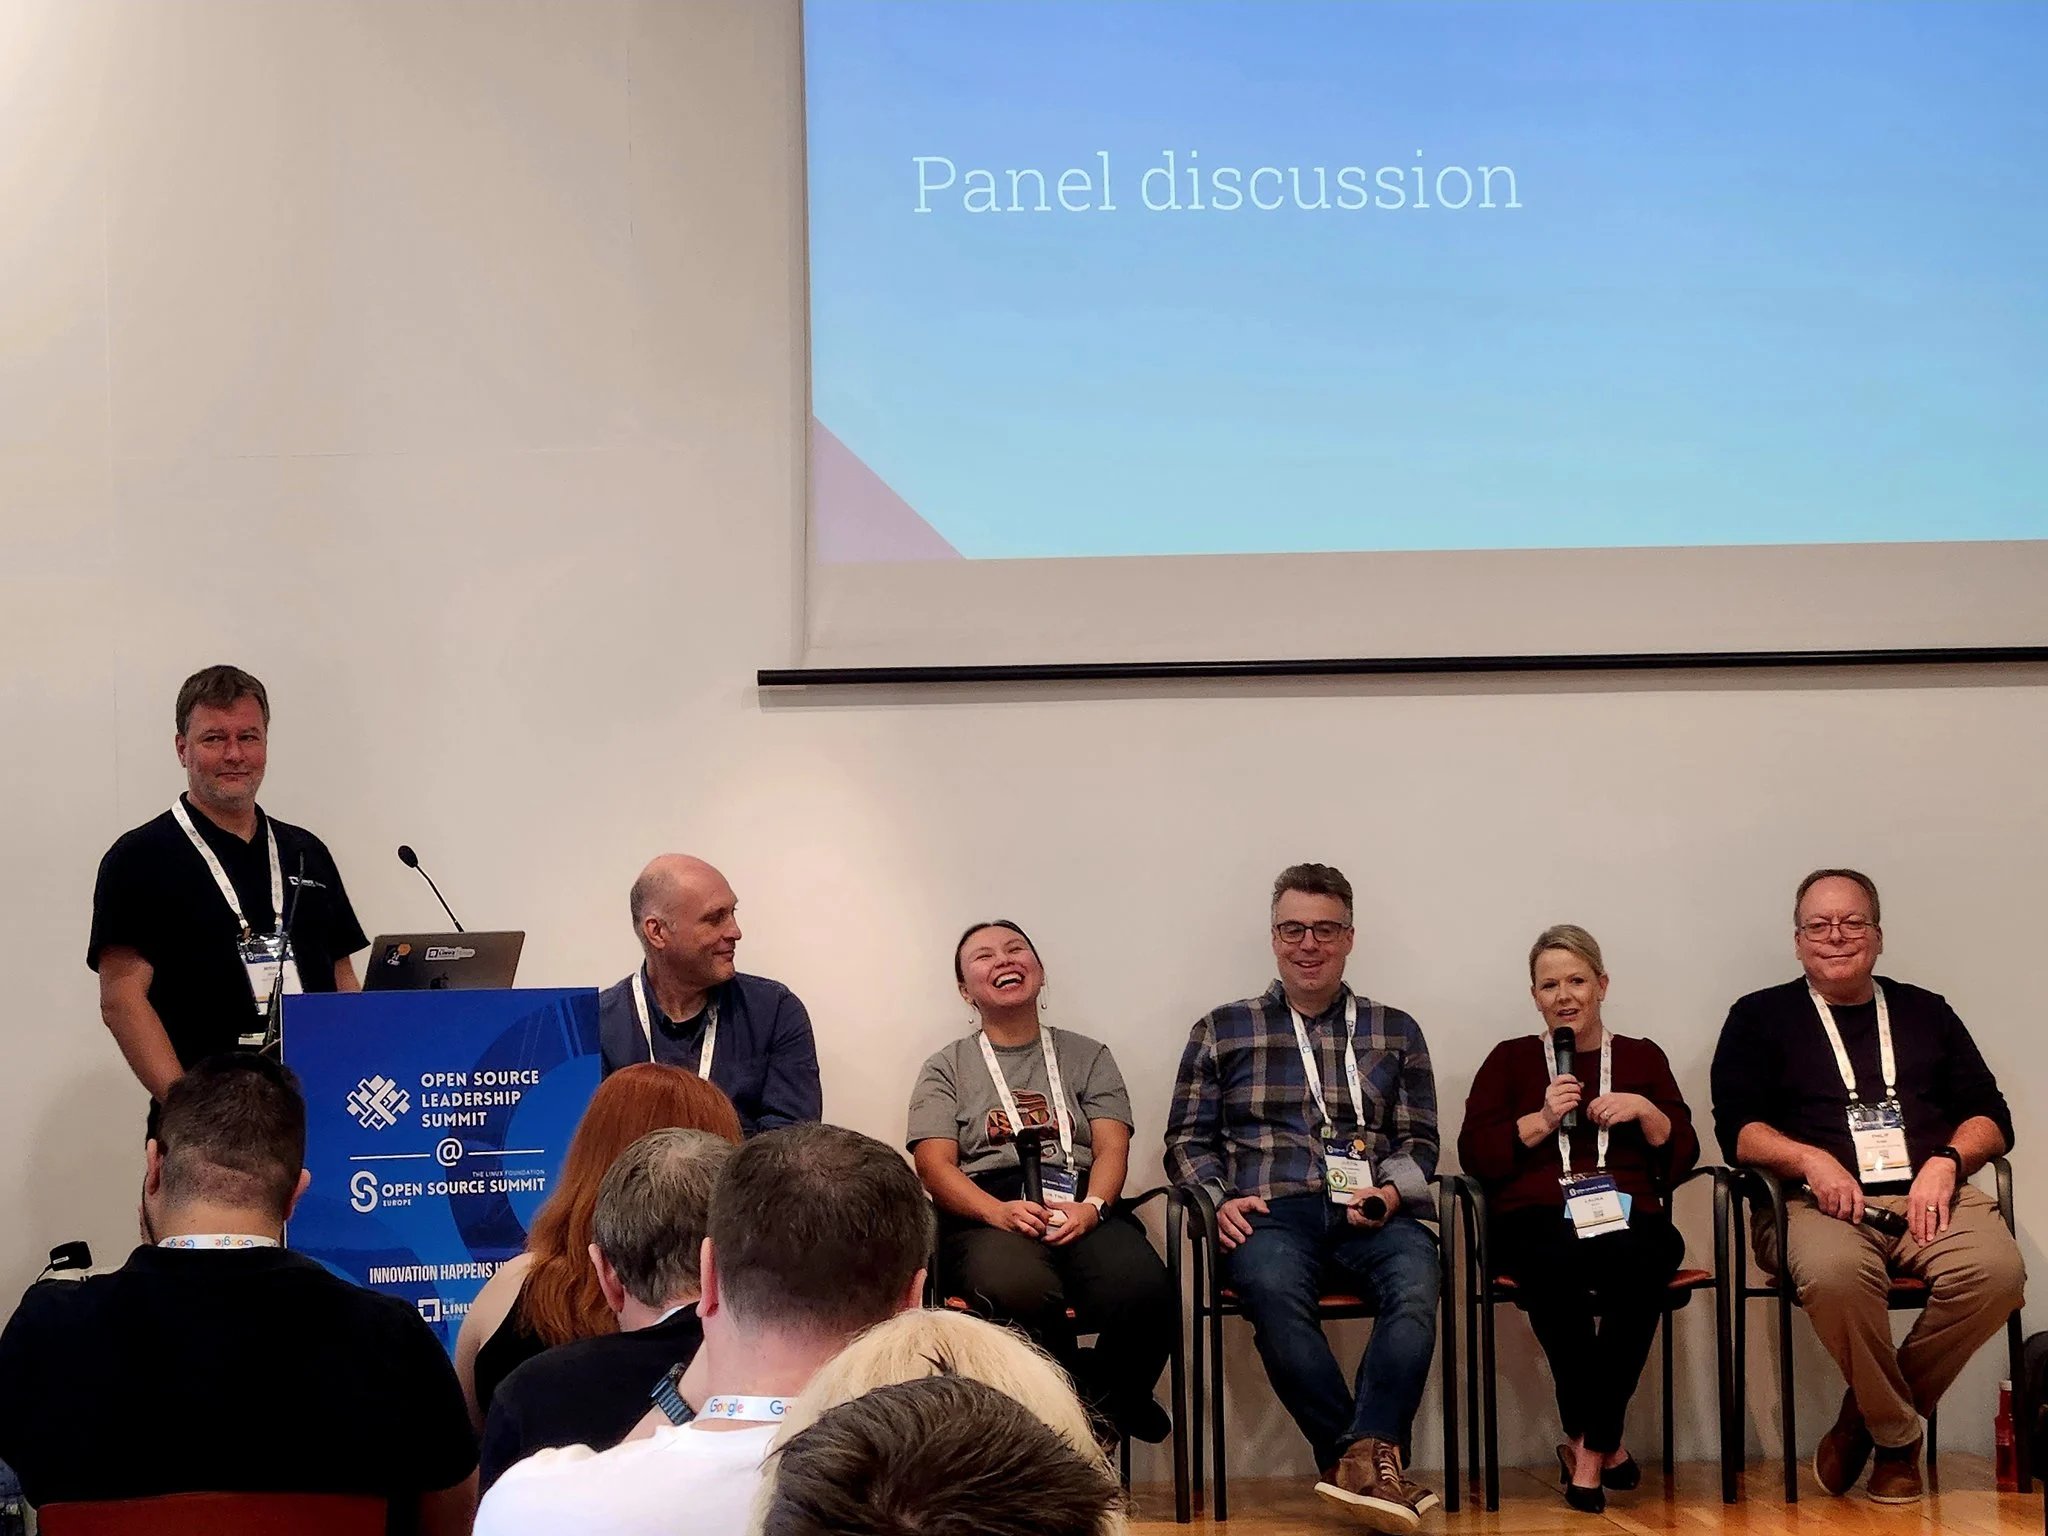 The impact of the CRA on the open source ecosystem - Panel discussion at Open Source Summit, Bilbao